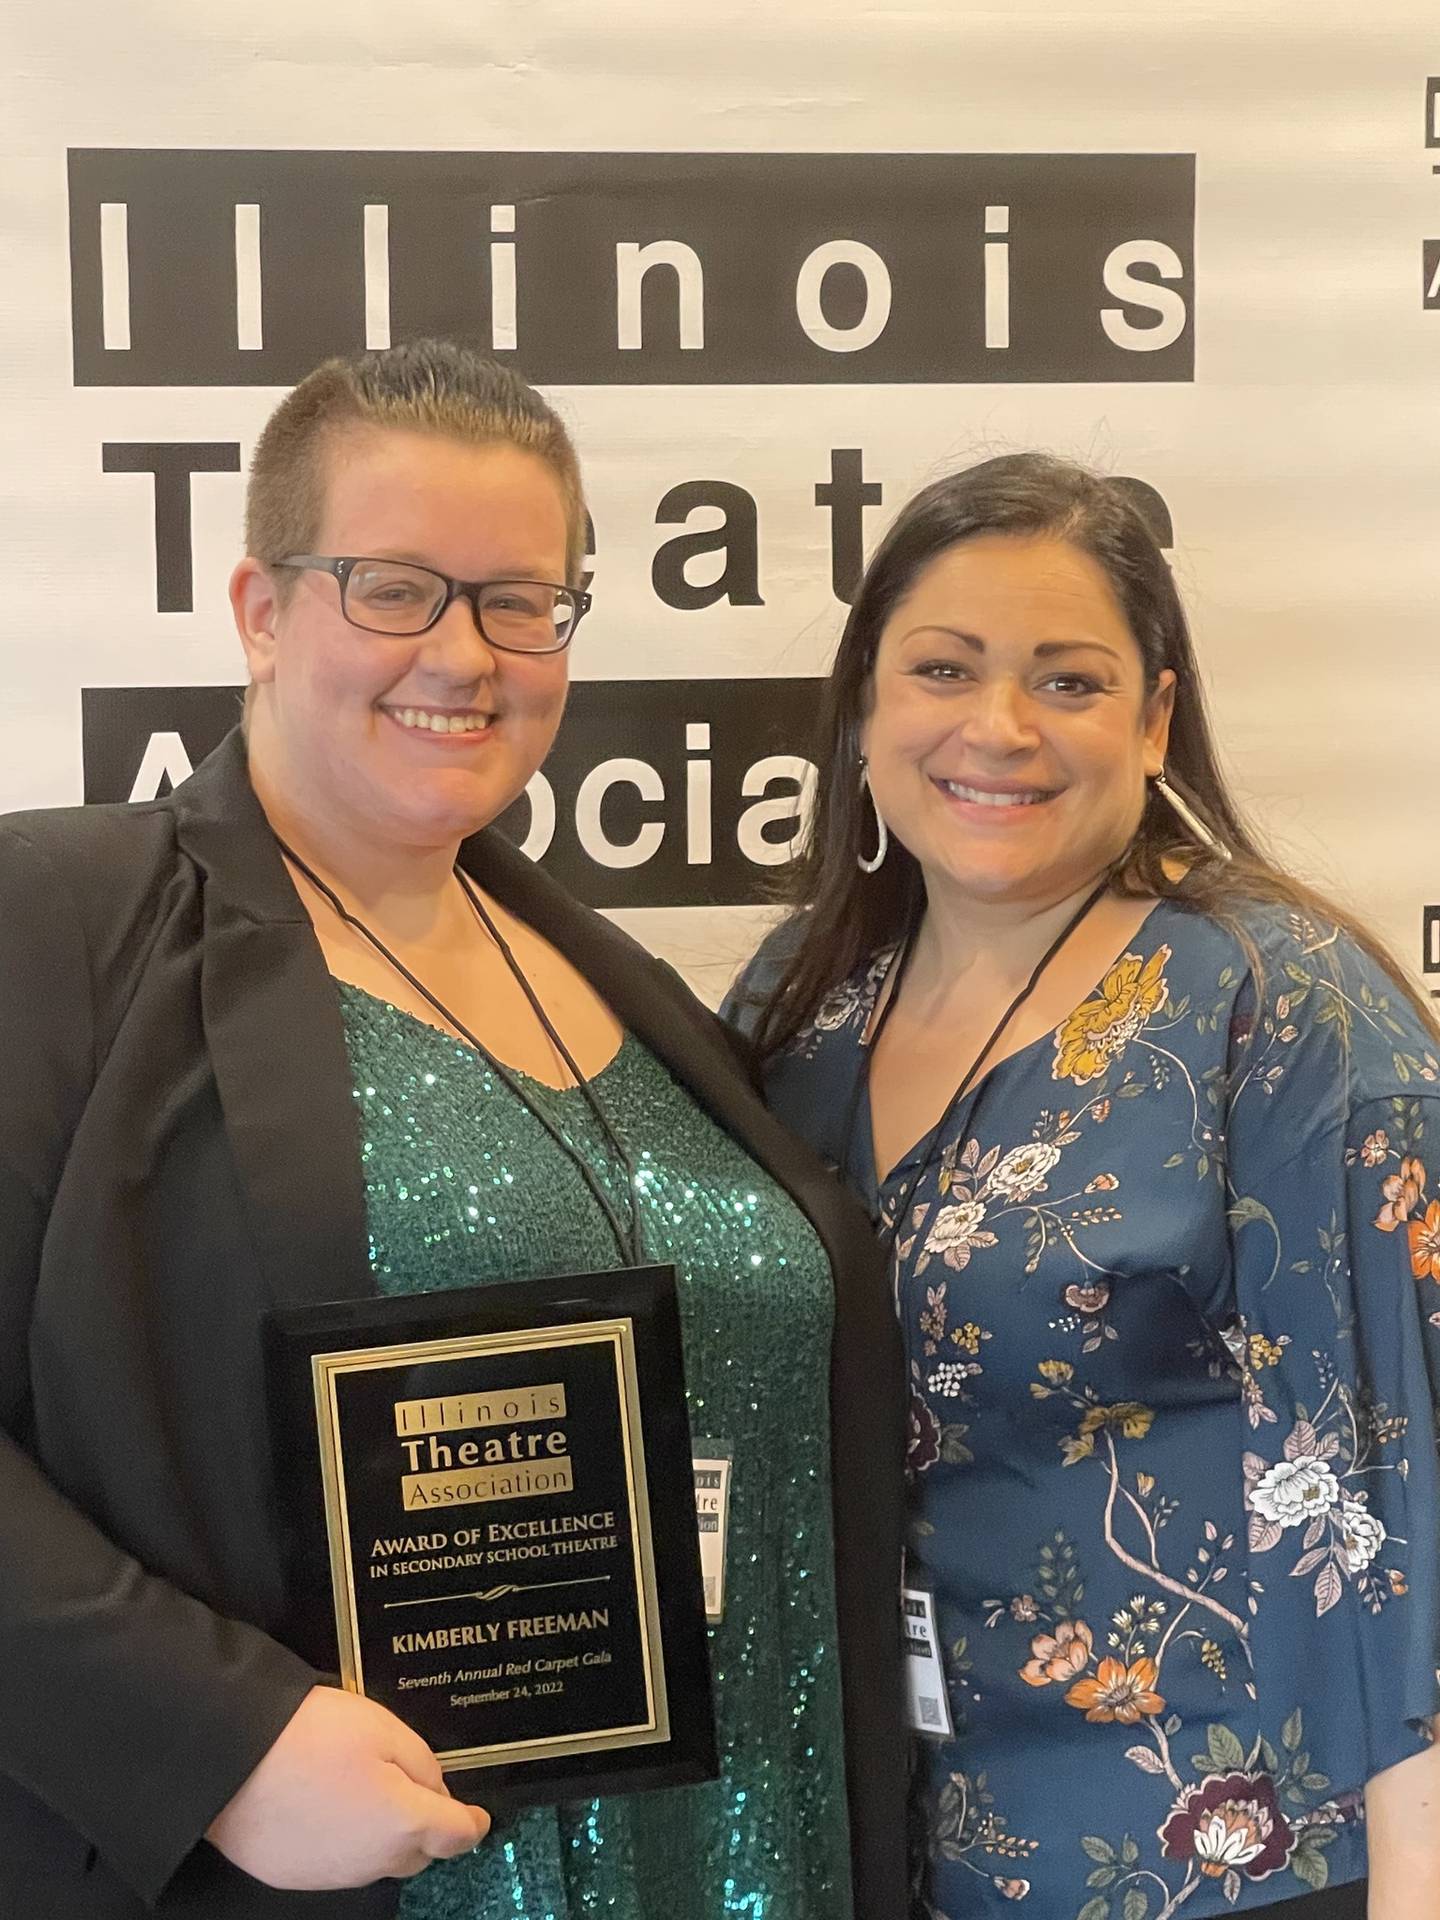 Kim Freeman of Streator Township High School was also honored with the award of excellence in the secondary education division, presented by ITA secondary division representative Deena Cassady.